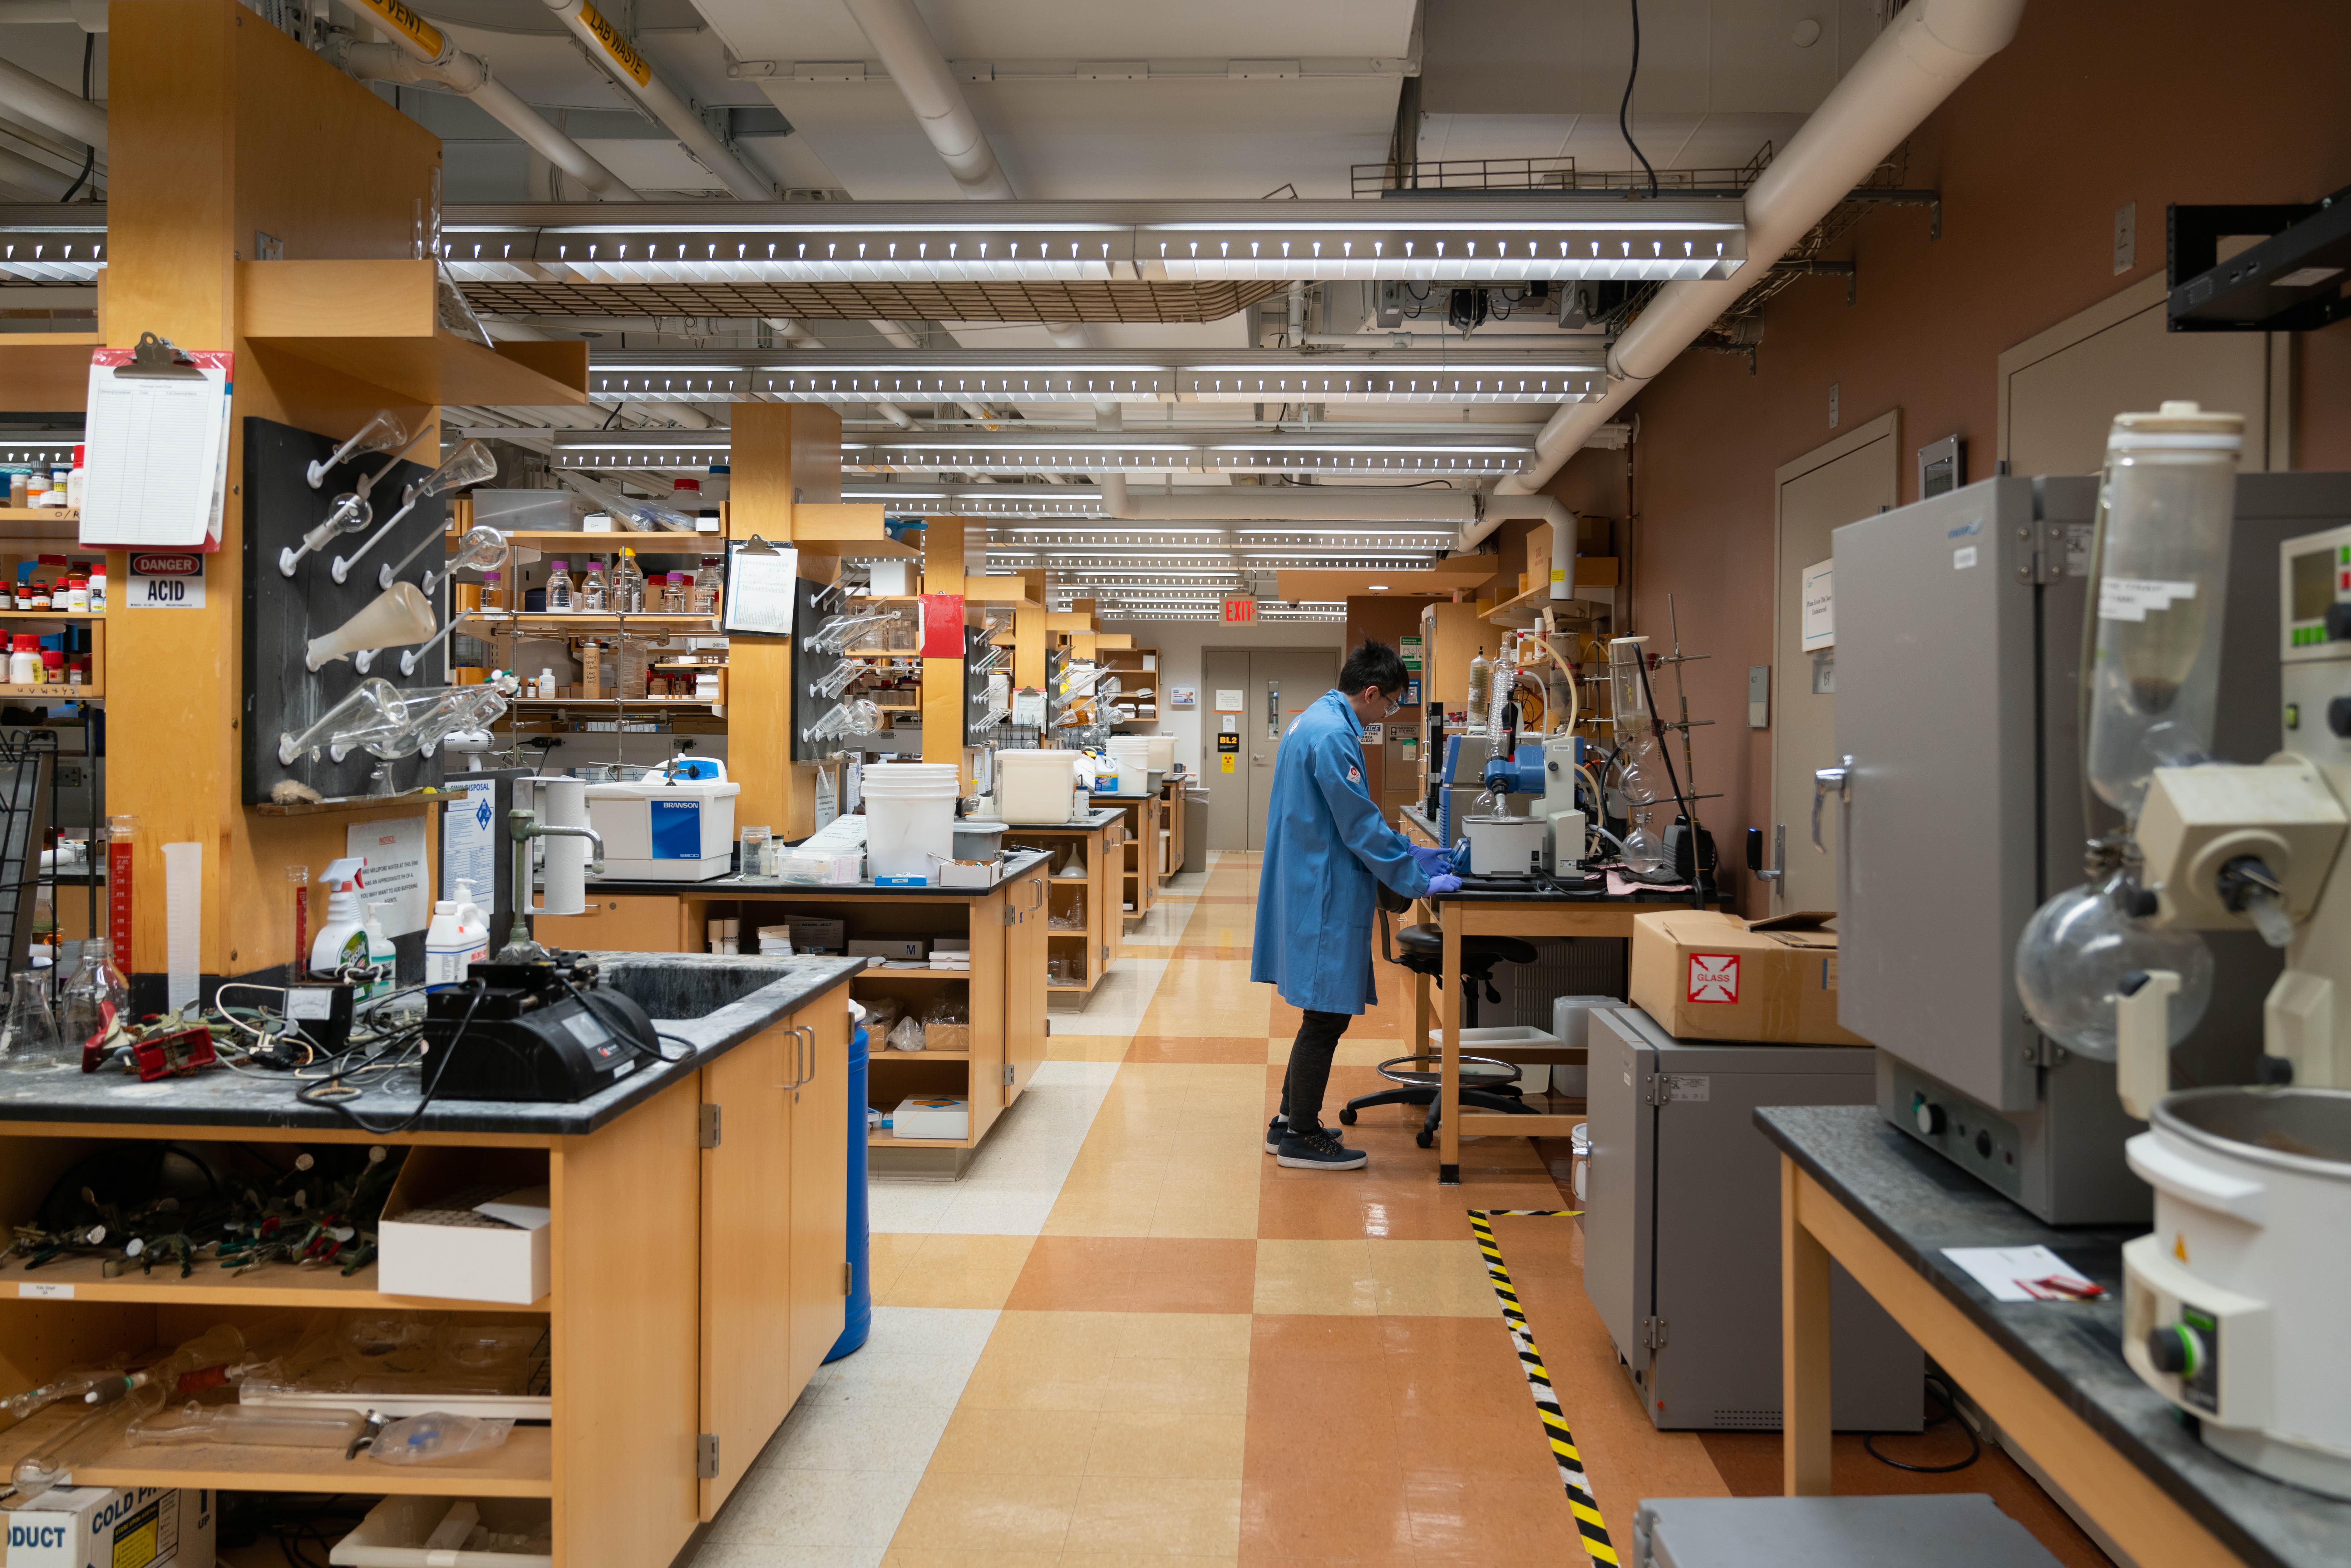 A researcher works in an ISN lab. (Image: Lily Paquette)